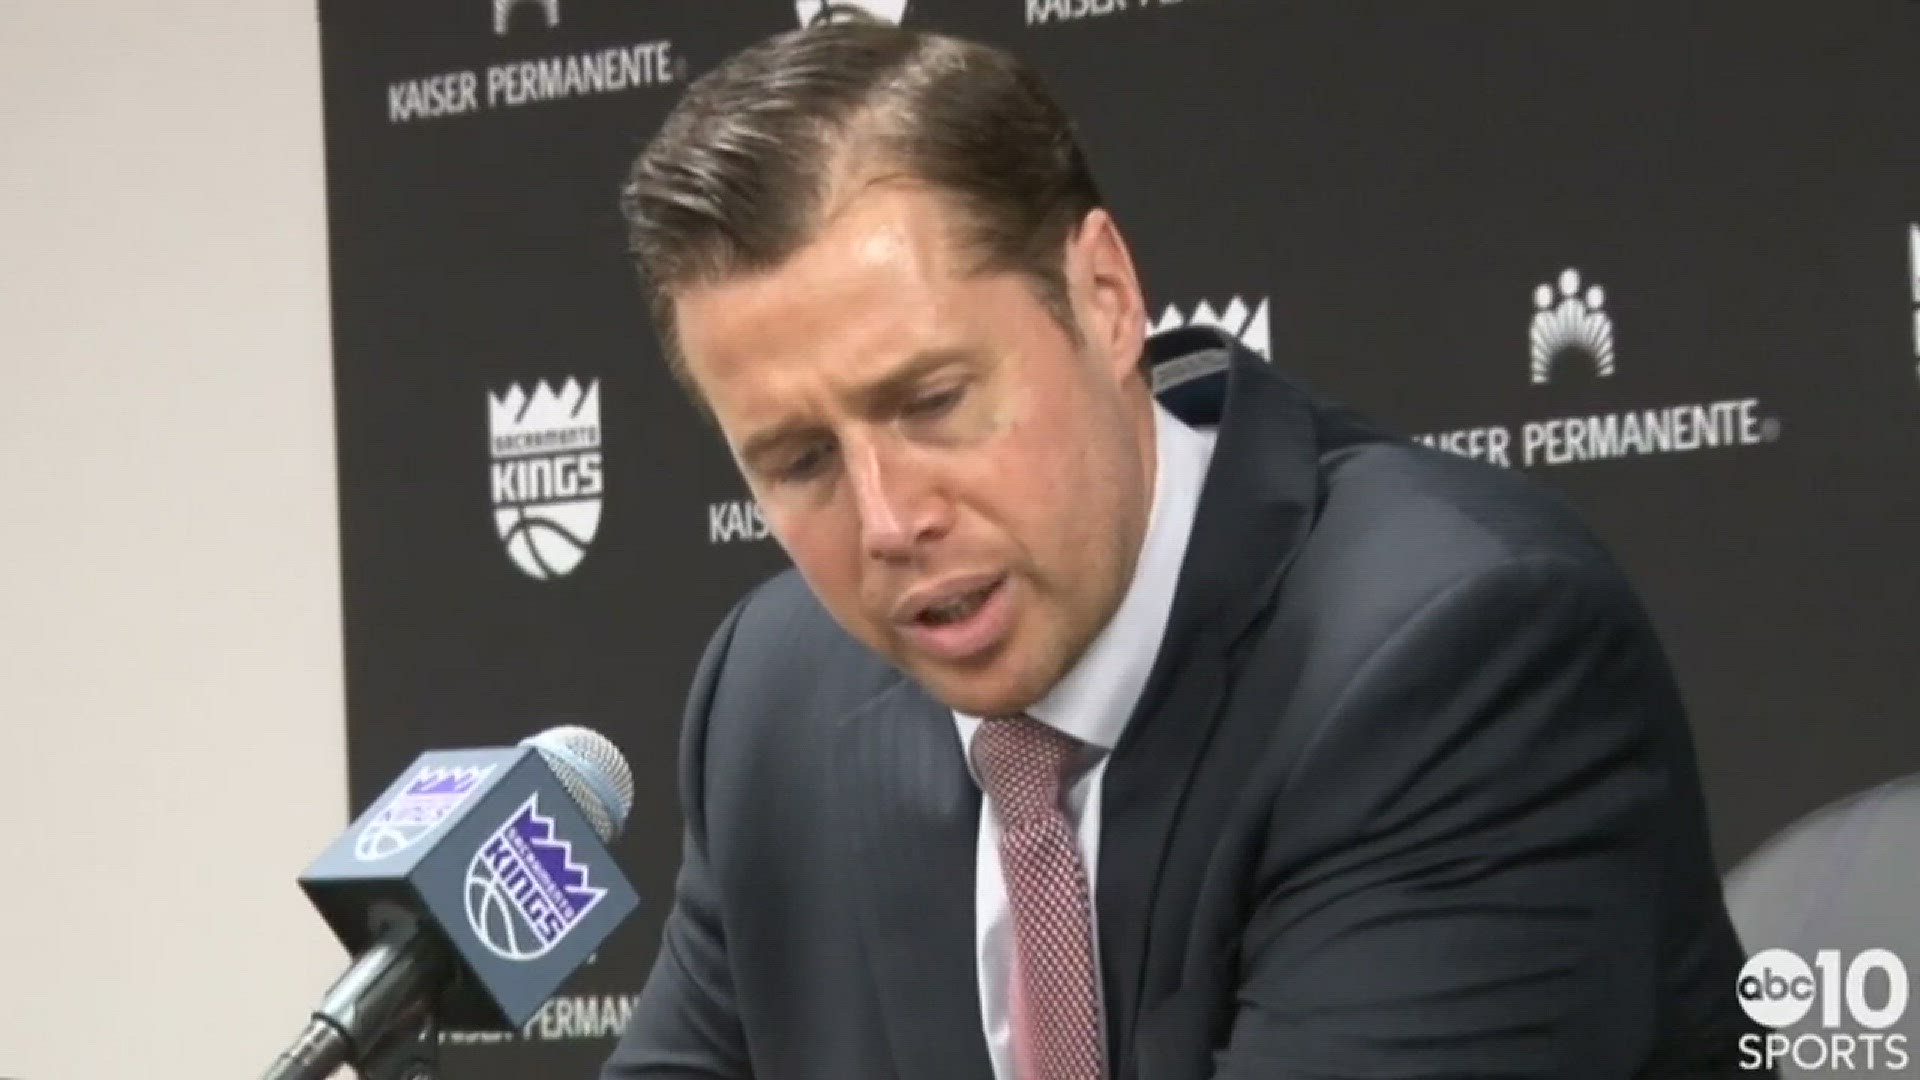 Kings head coach Dave Joerger talks about his team's win over the Cleveland Cavaliers on Wednesday night, the play from Vince Carter and Willie Cauley-Stein.